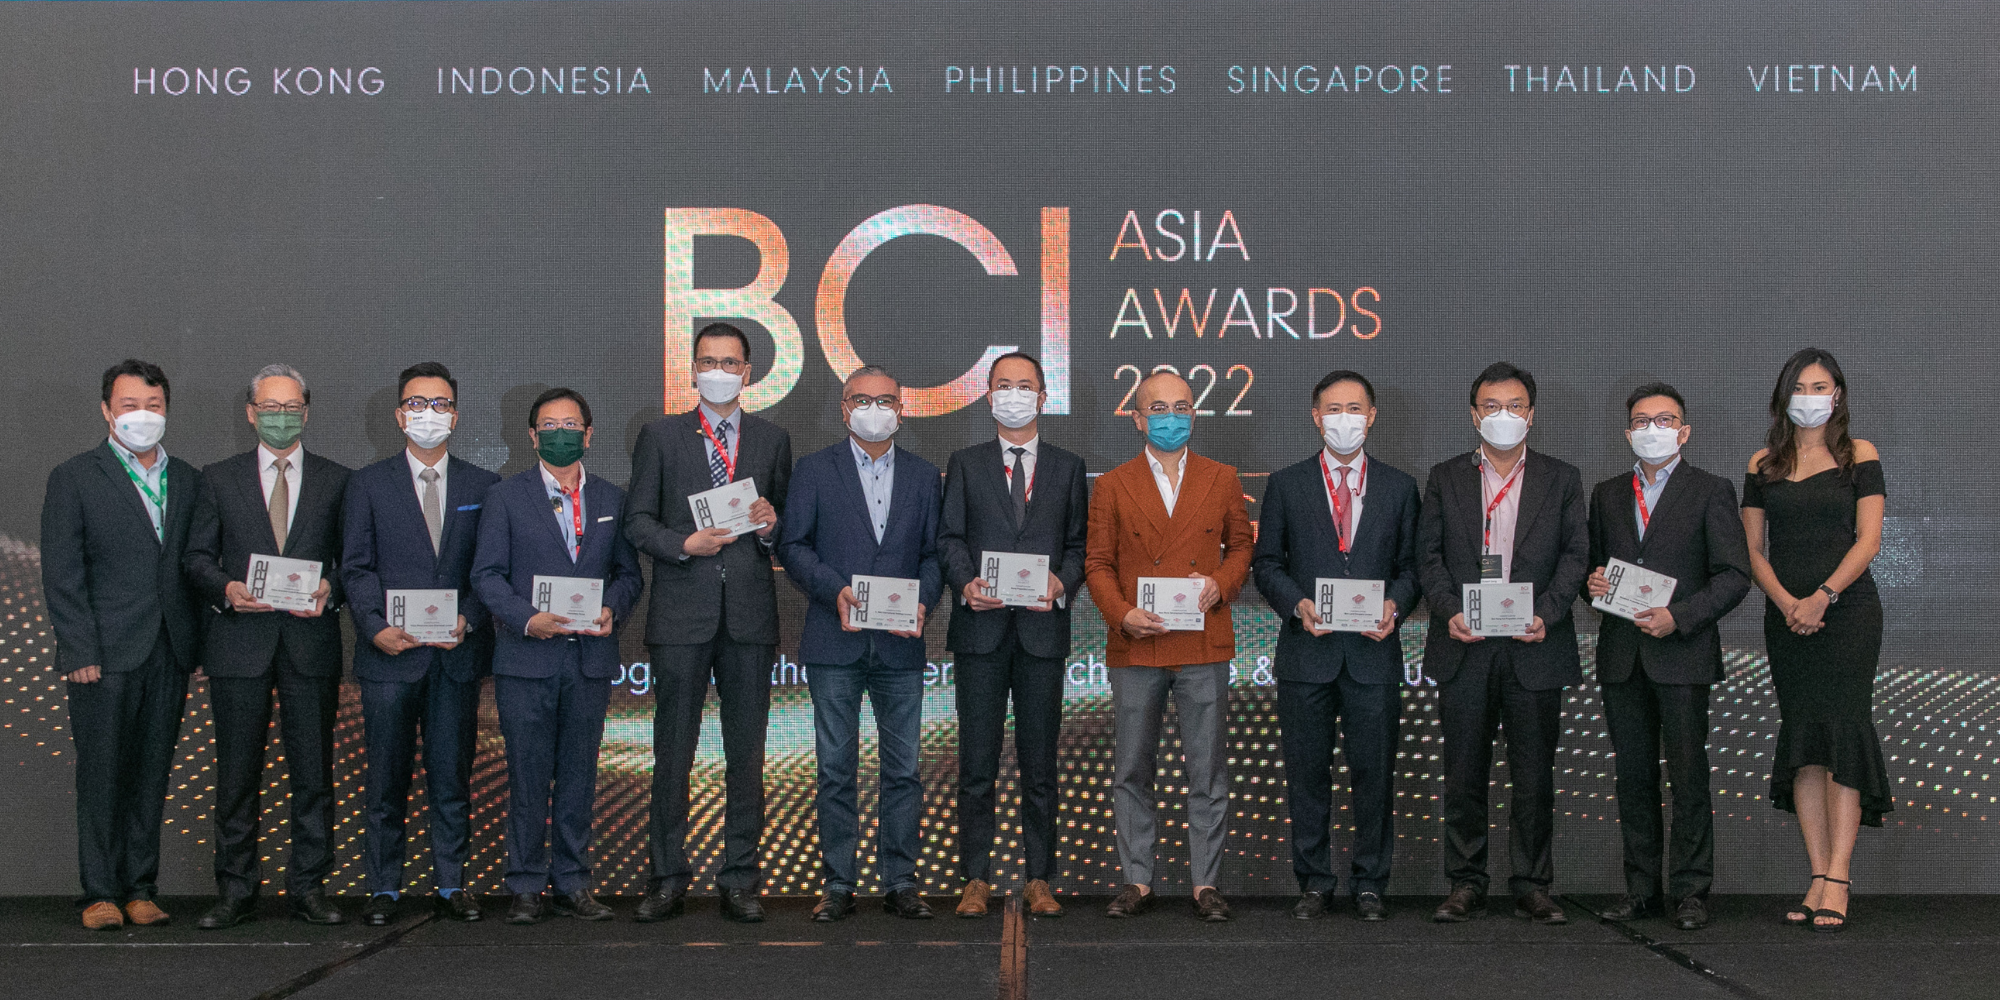 Featured image for “BCI Asia Awards Hong Kong 2022”